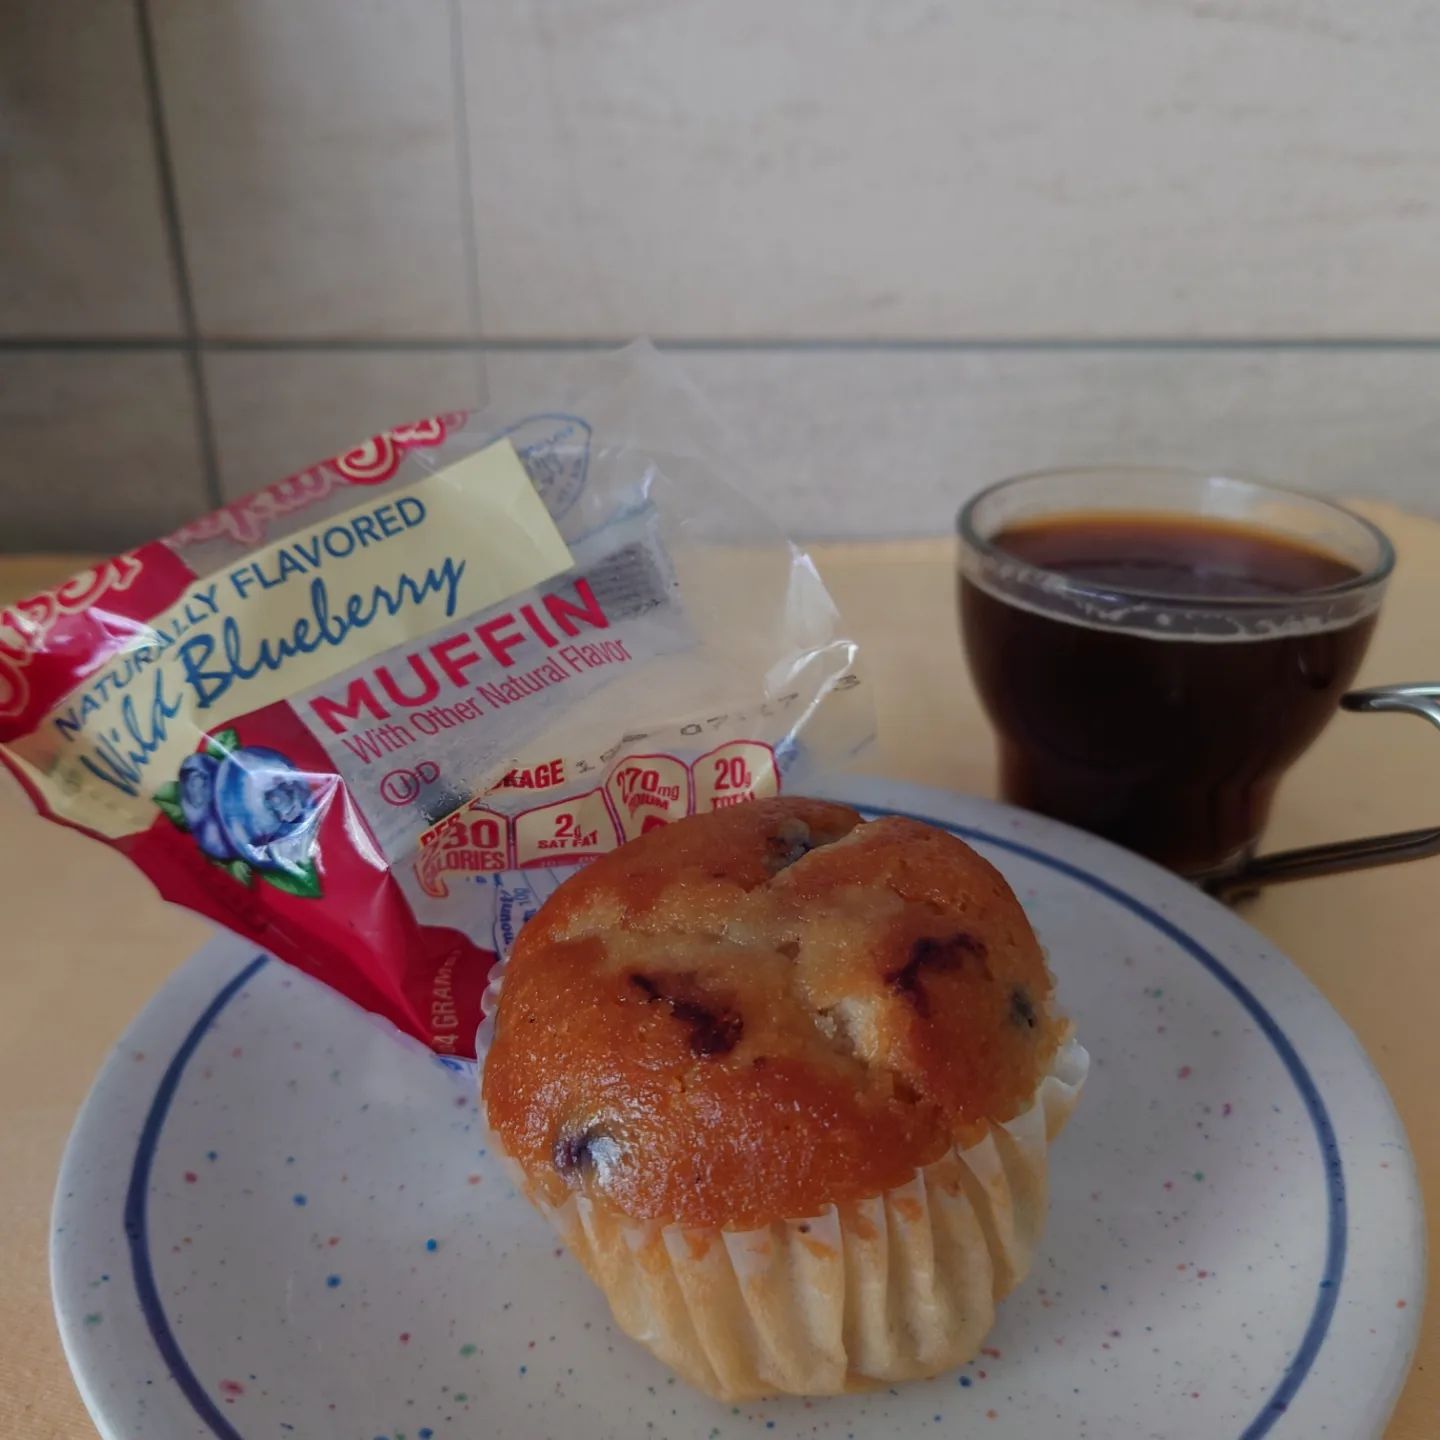 The pre-packaged blueberry muffin with coffee 2022